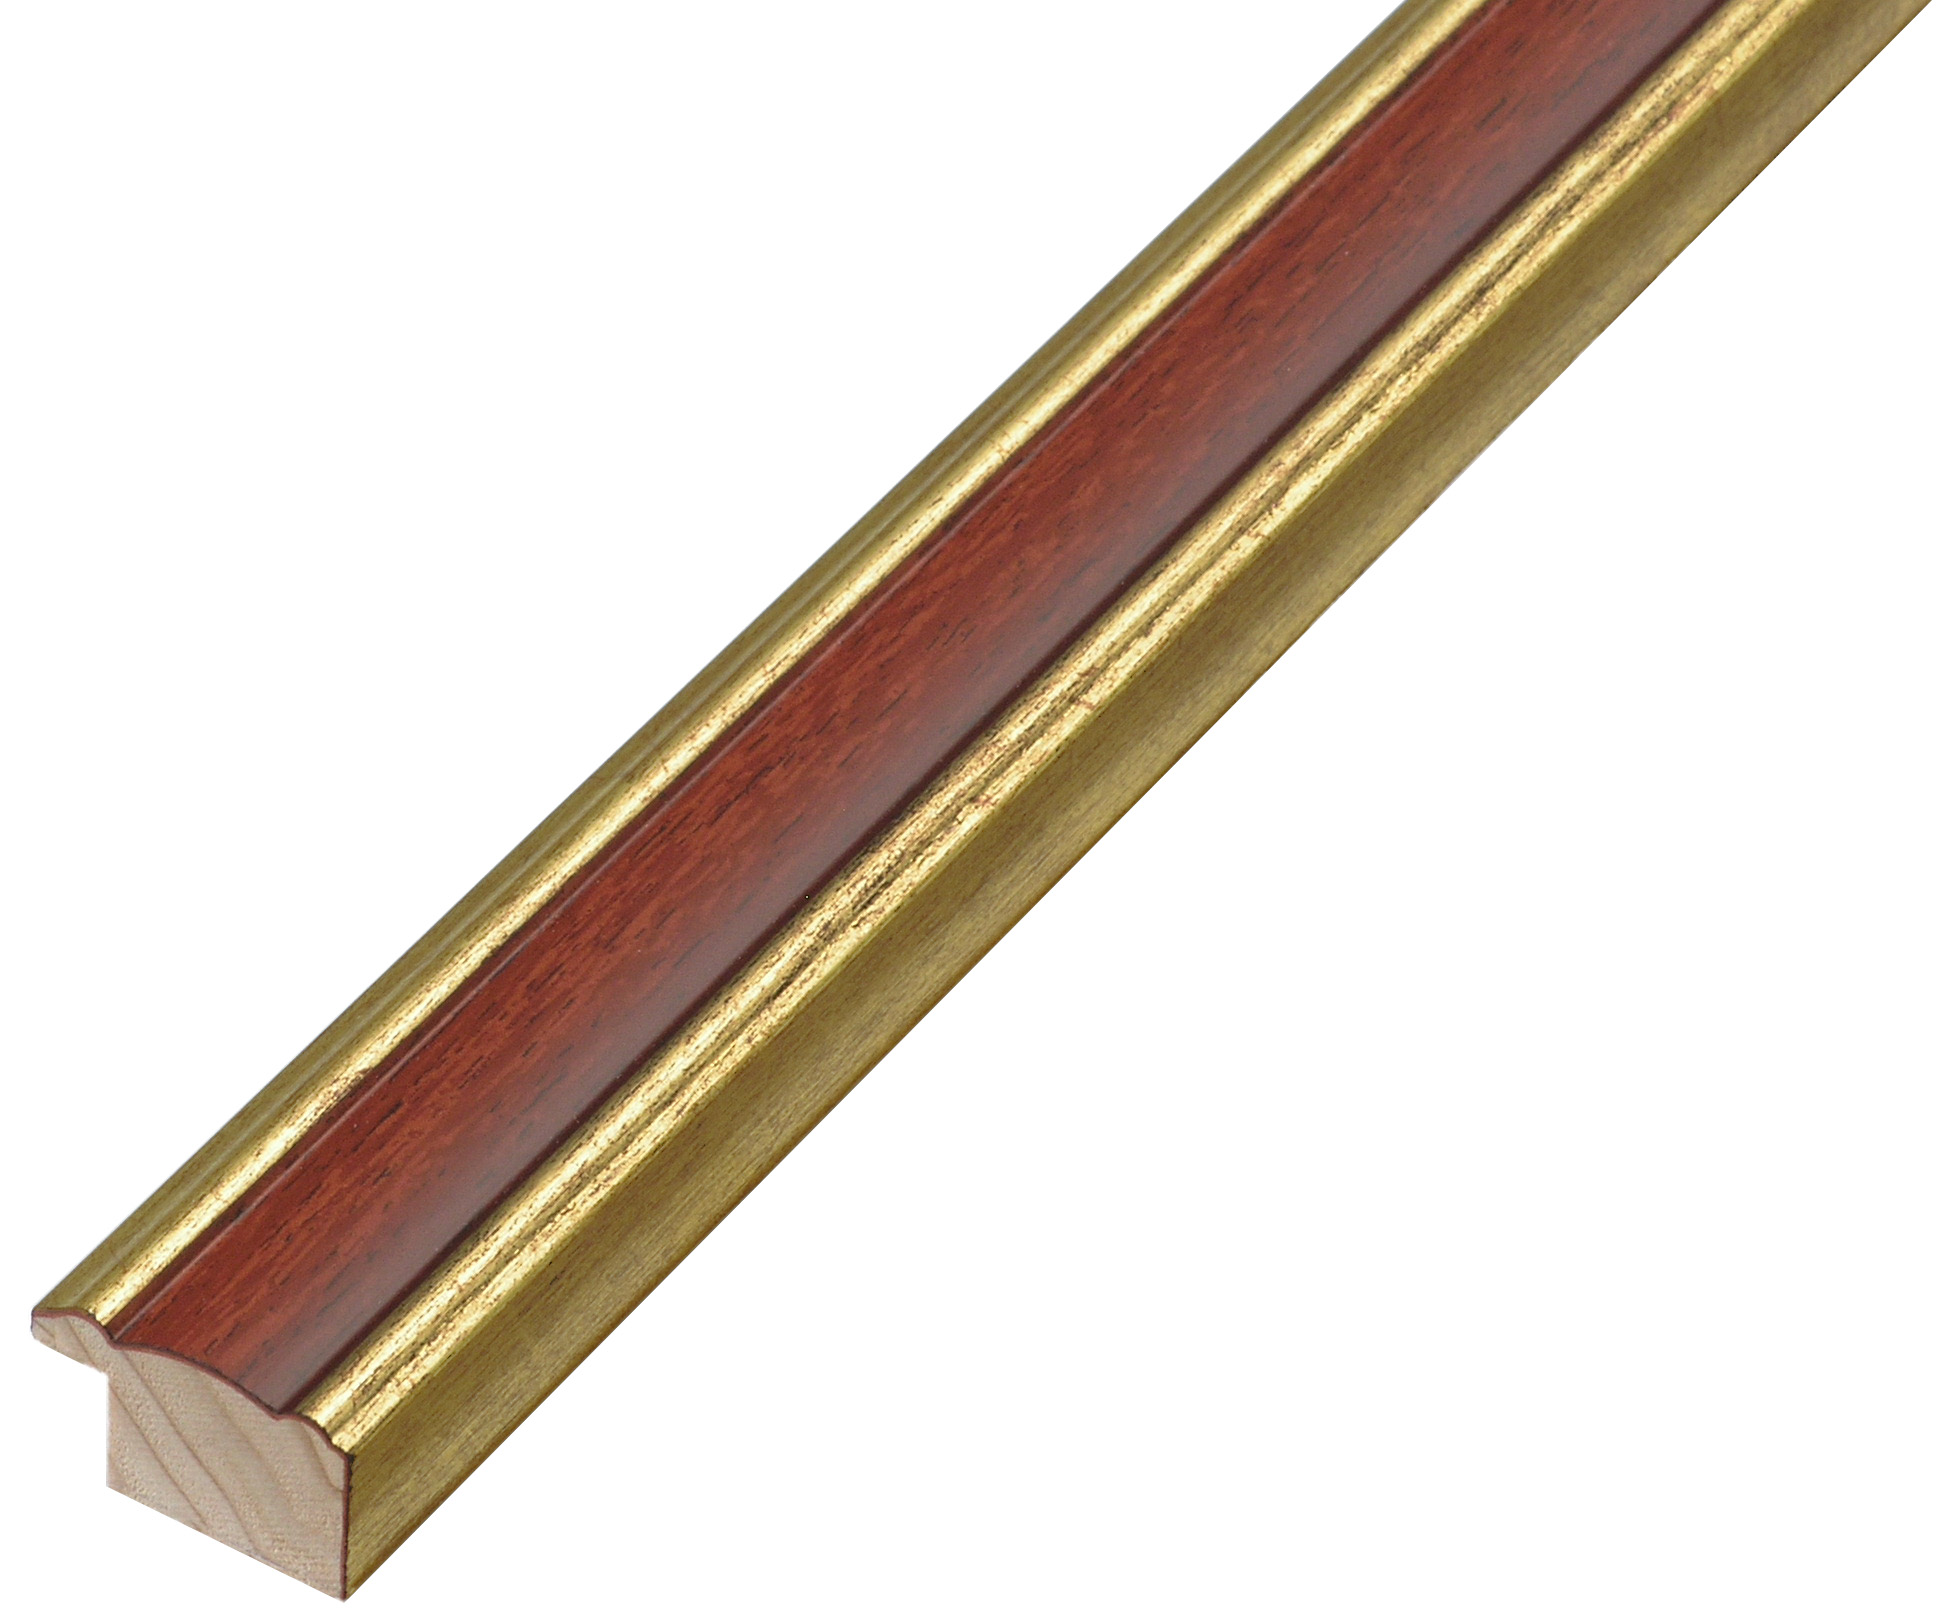 Moulding ayous jointed width 24mm - Gold with mahogany band